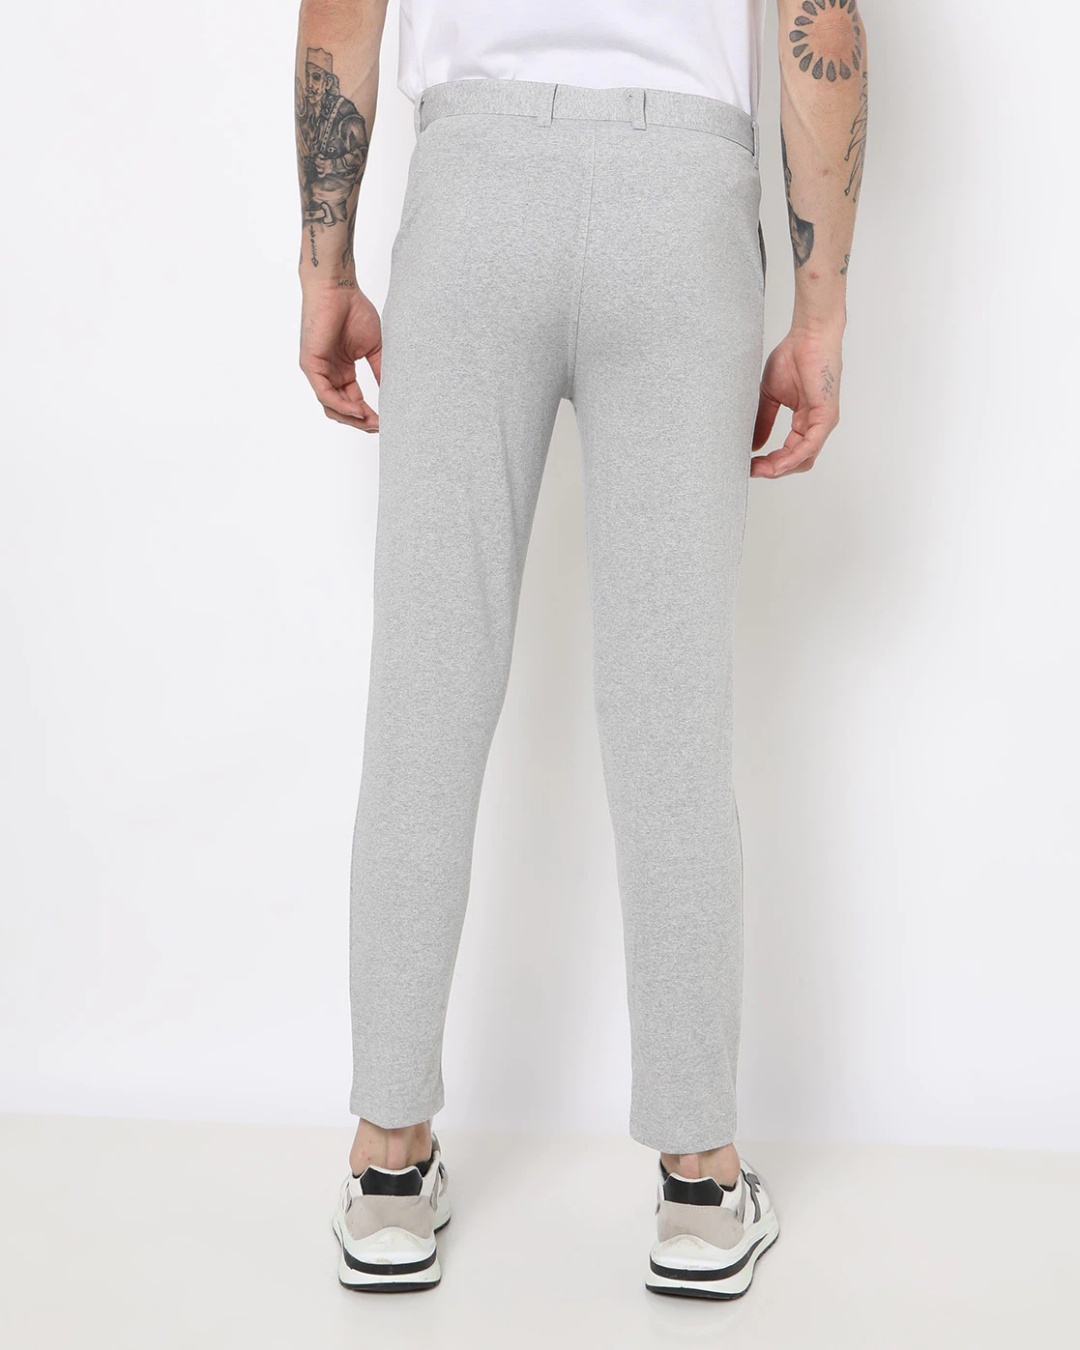 Shop Men's Grey Tapered Fit Chinos-Design